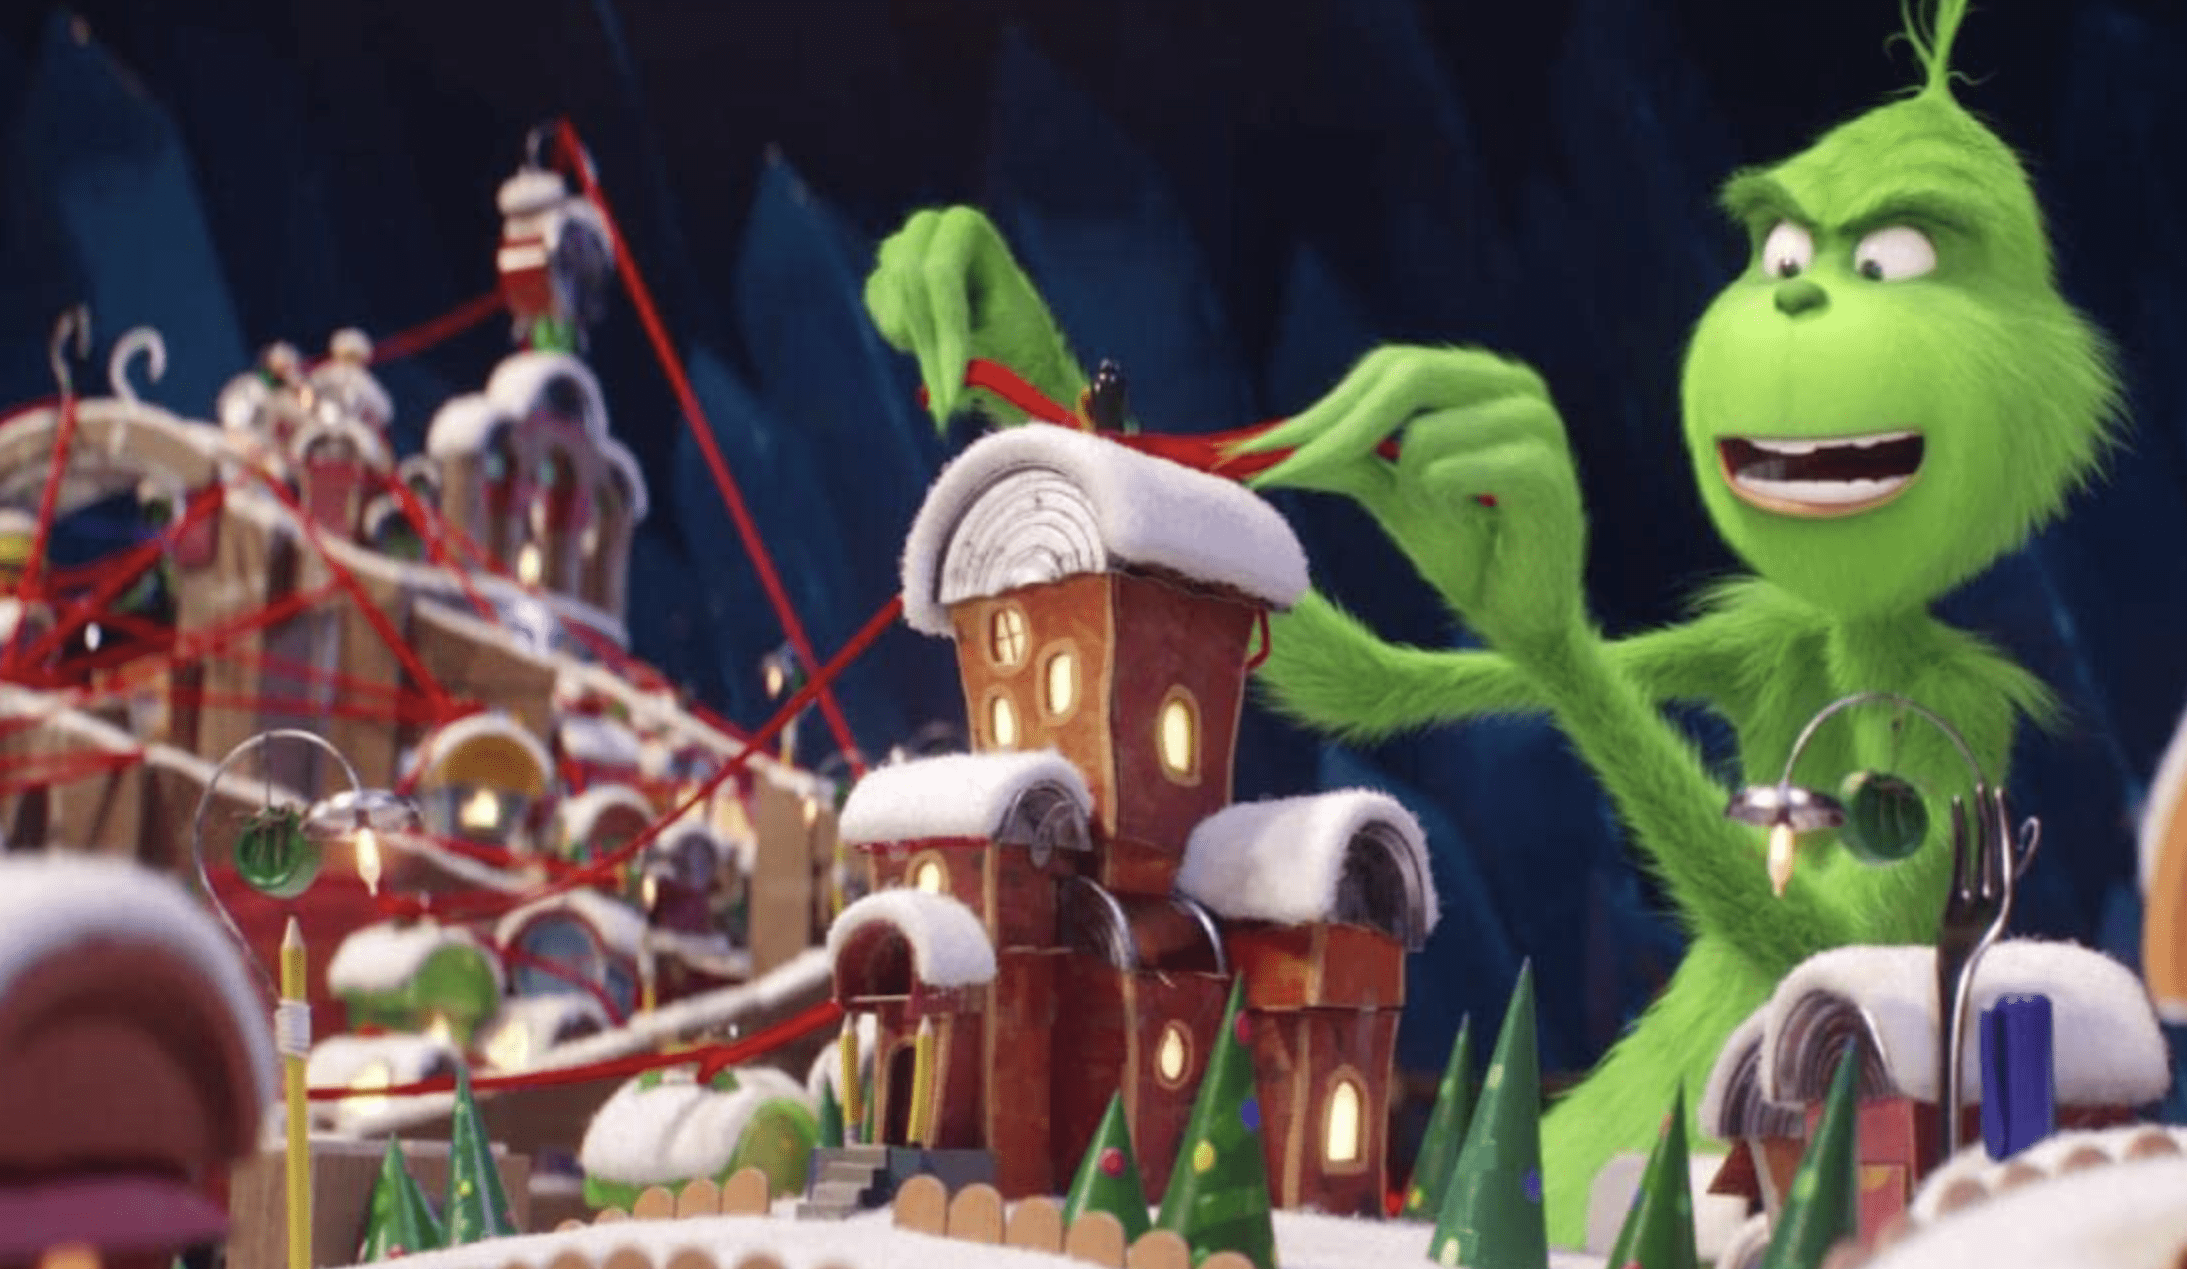 The Grinch plays with a red string on a homemade map of Whoville.